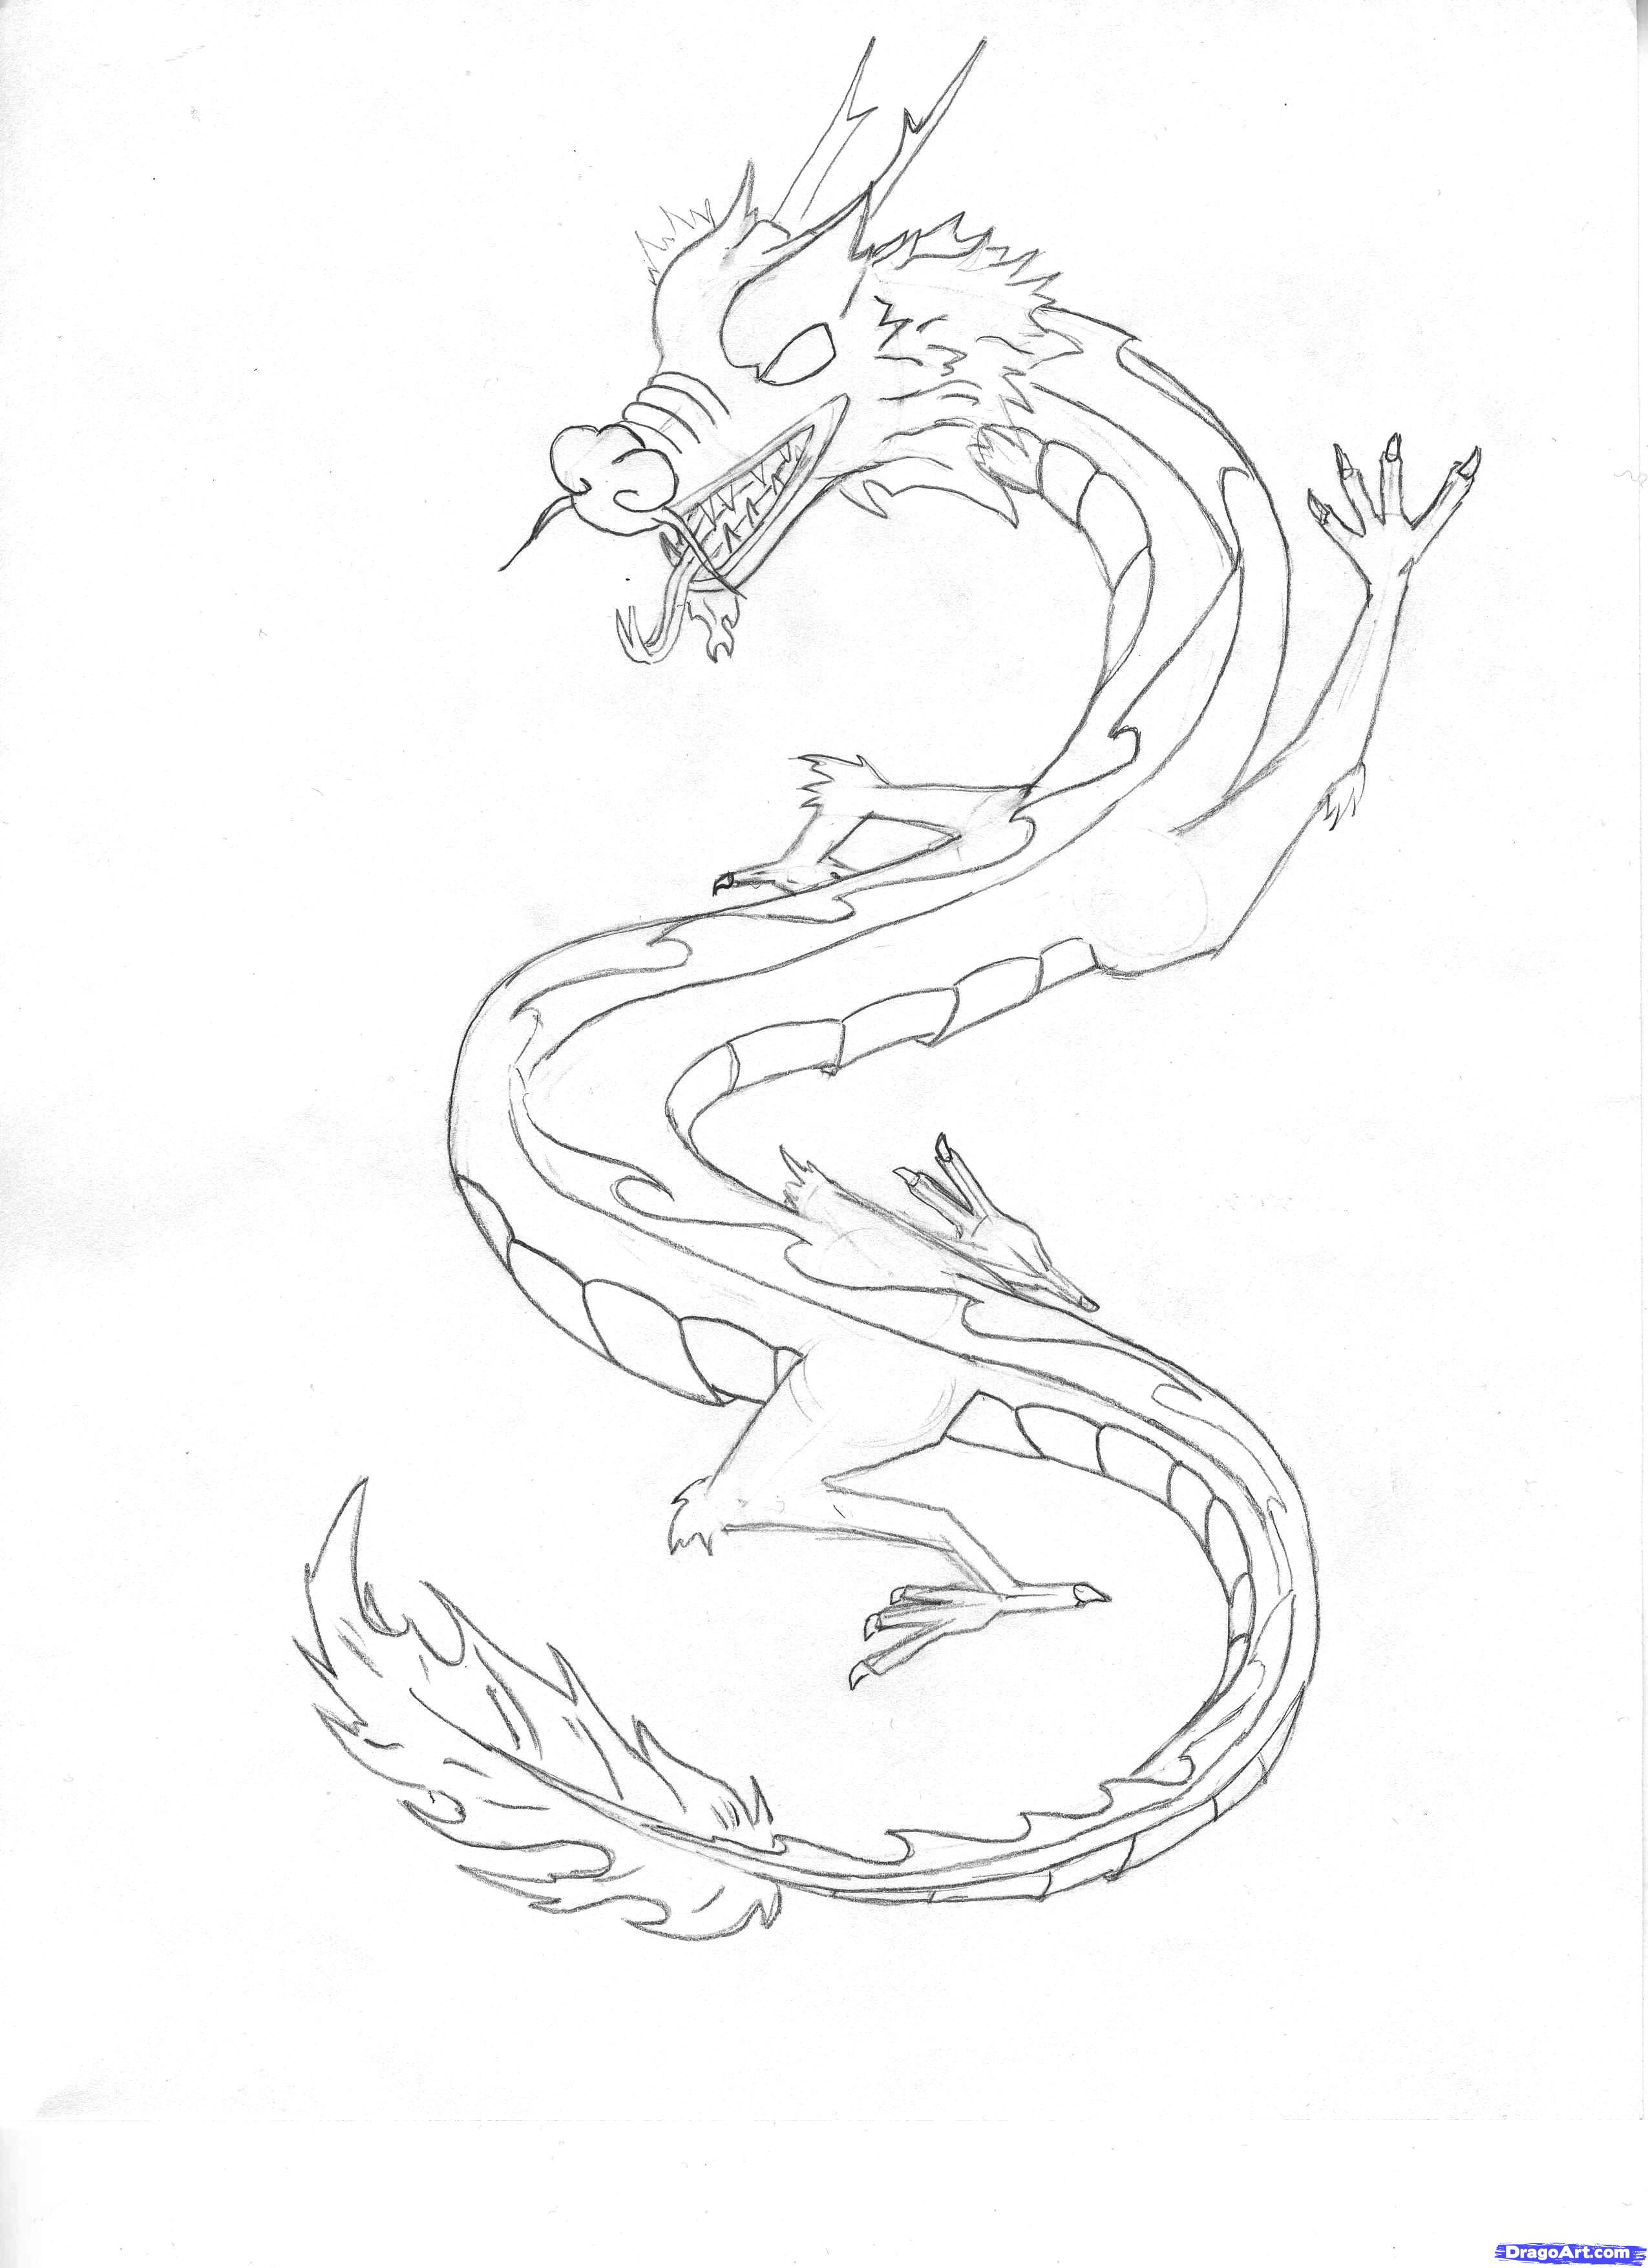 Chinese Dragon Drawing - Cliparts.co